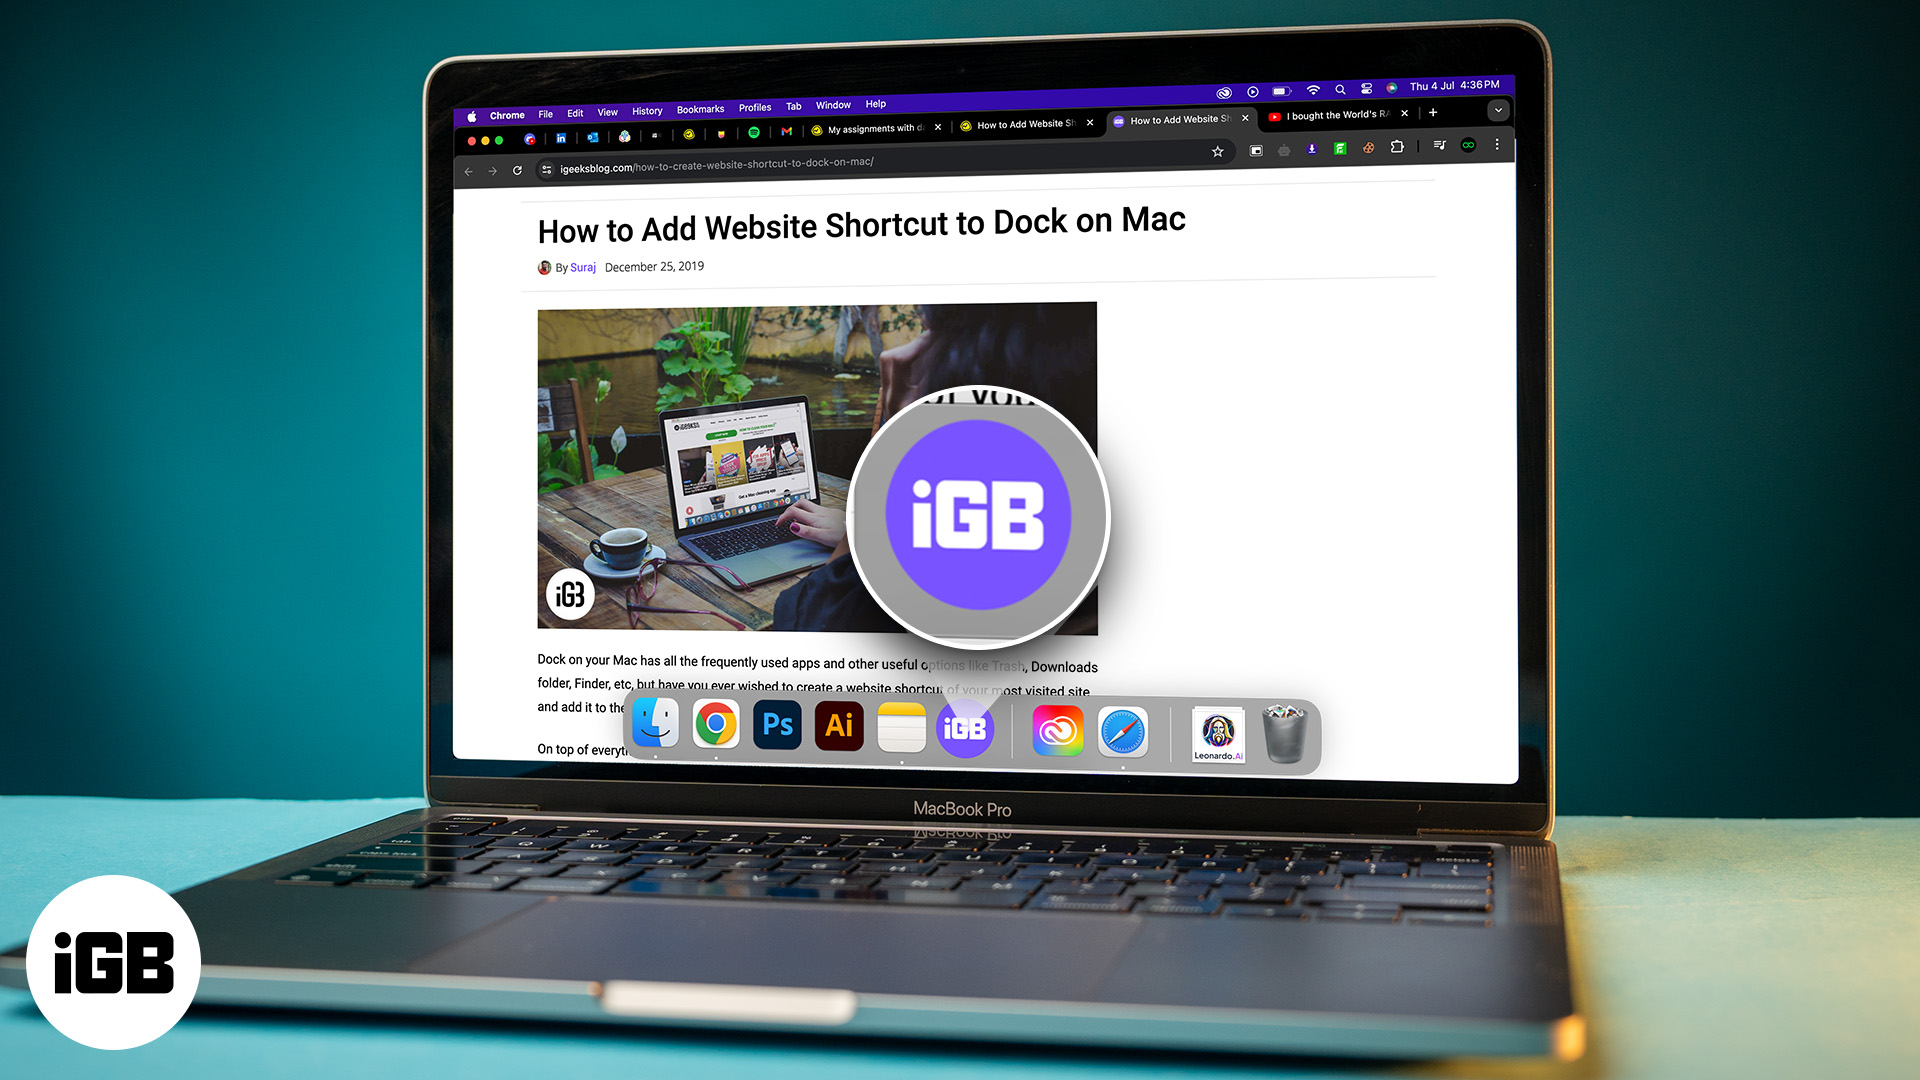 How to Add Website Shortcut to Dock on Mac